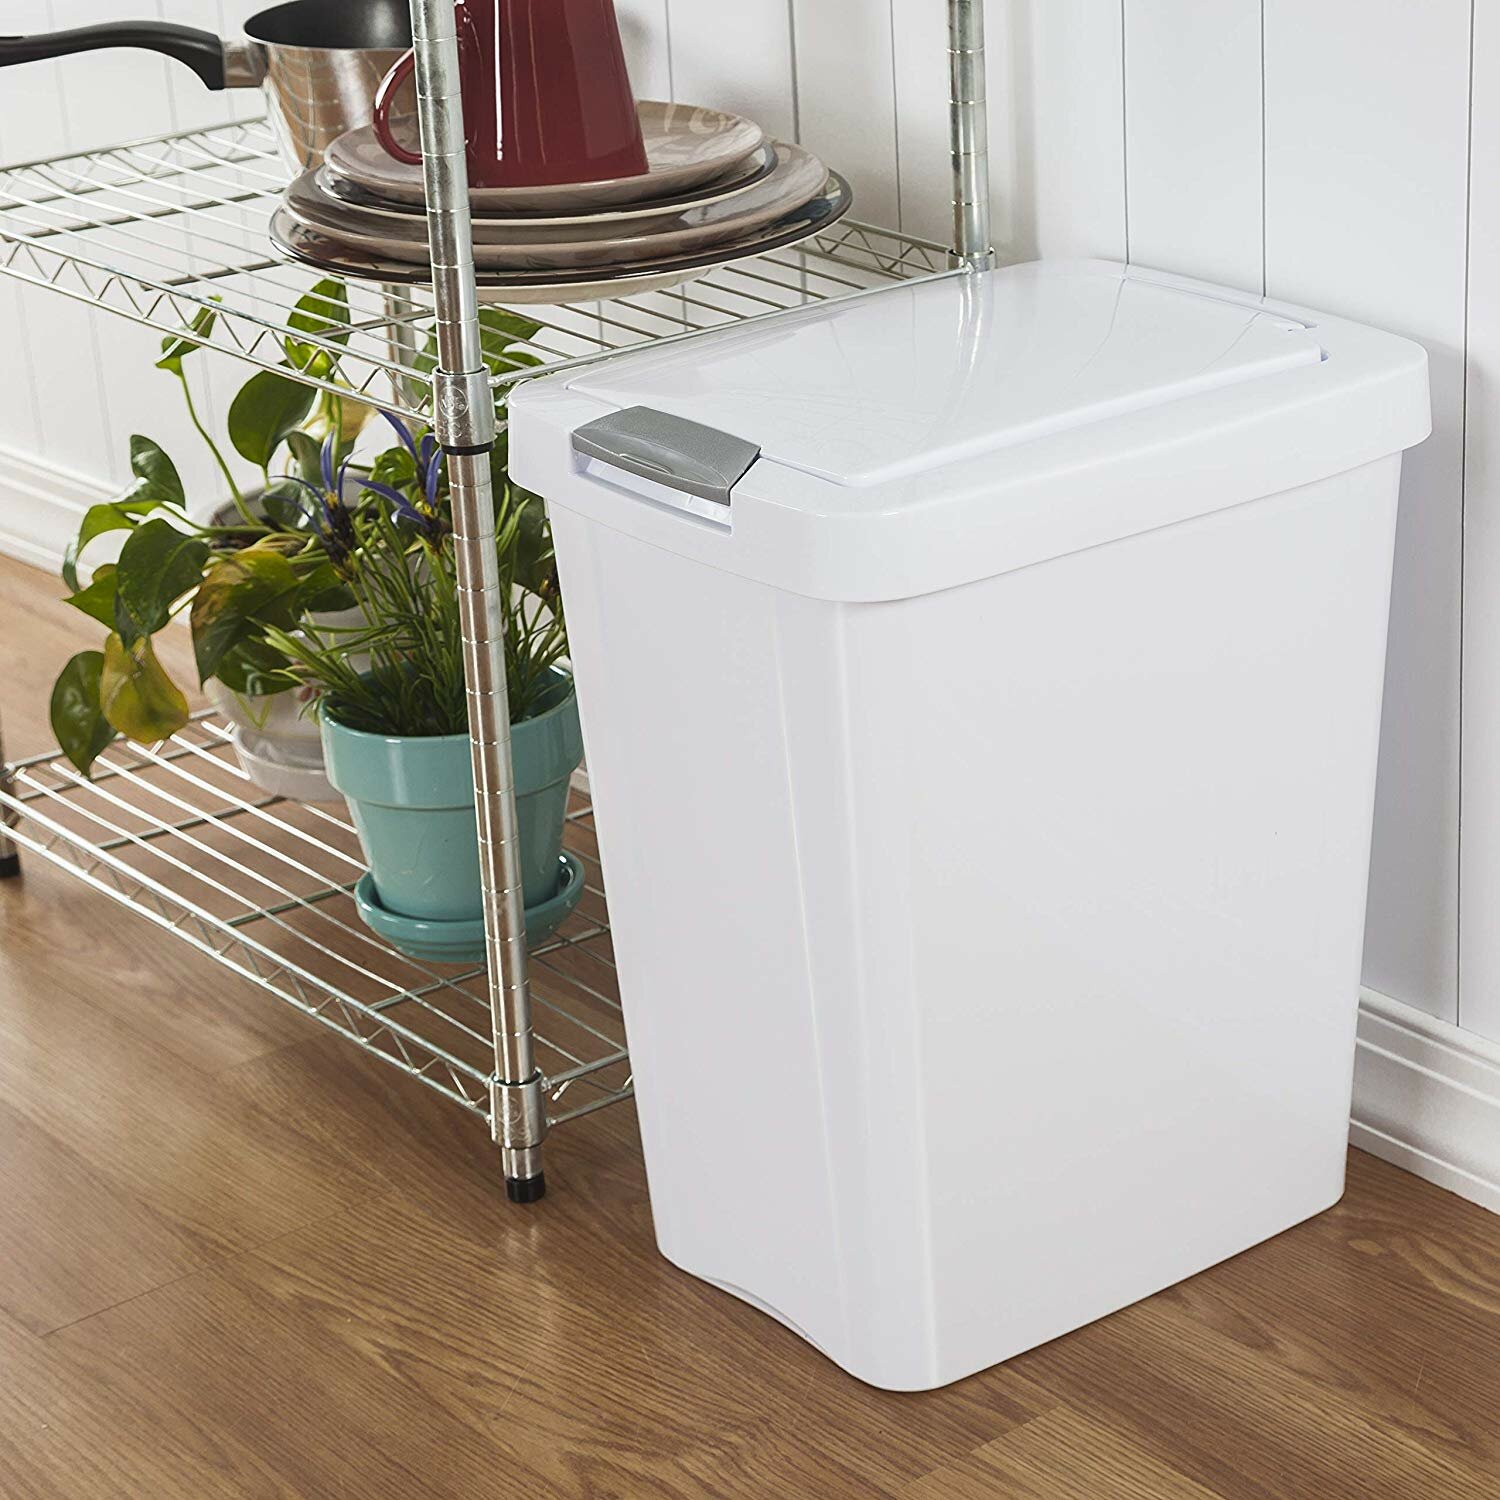 Household Trash Bin Pp 1.8 Gallon Waste Bin Garbage Can With Press Top Lid  White